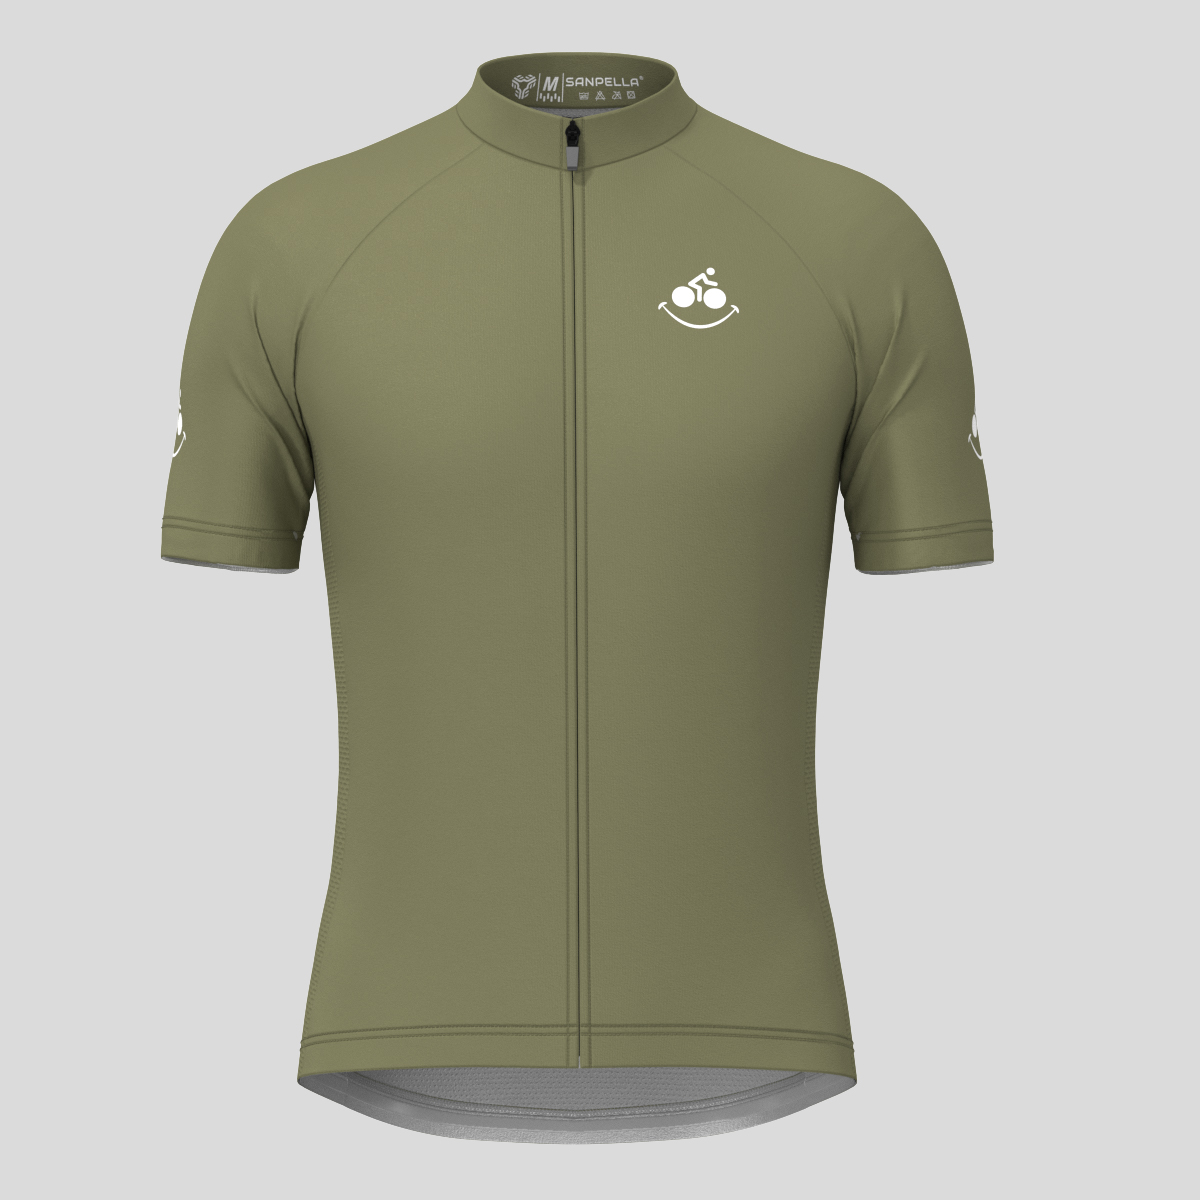 Men's Bike Smile Cycling Jersey - Olive